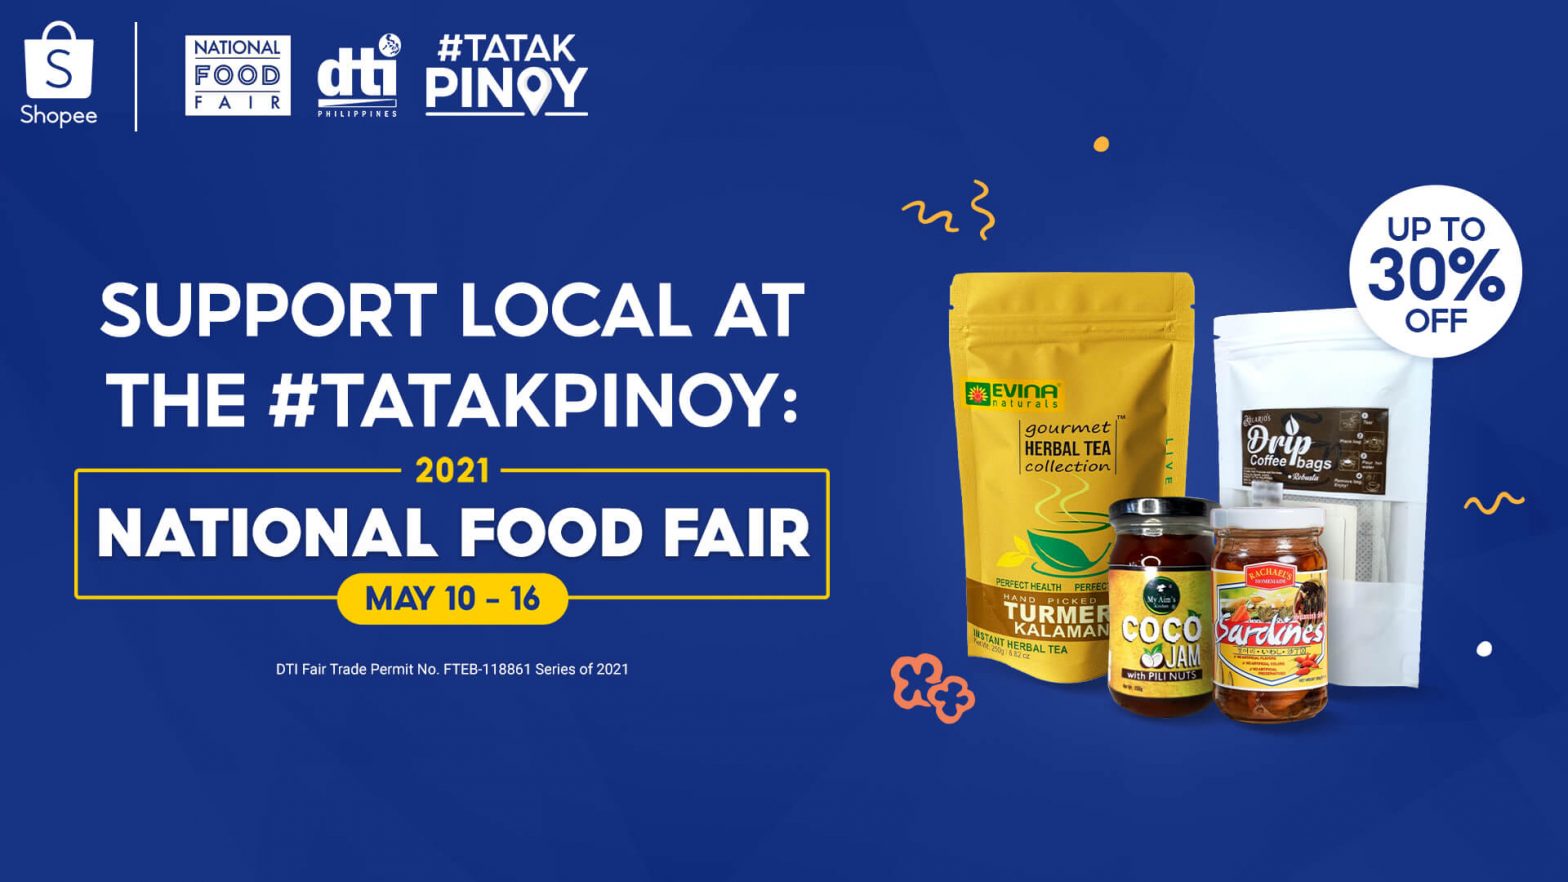 Shopee partners with DTI to support community-owned food businesses through the National Food Fair